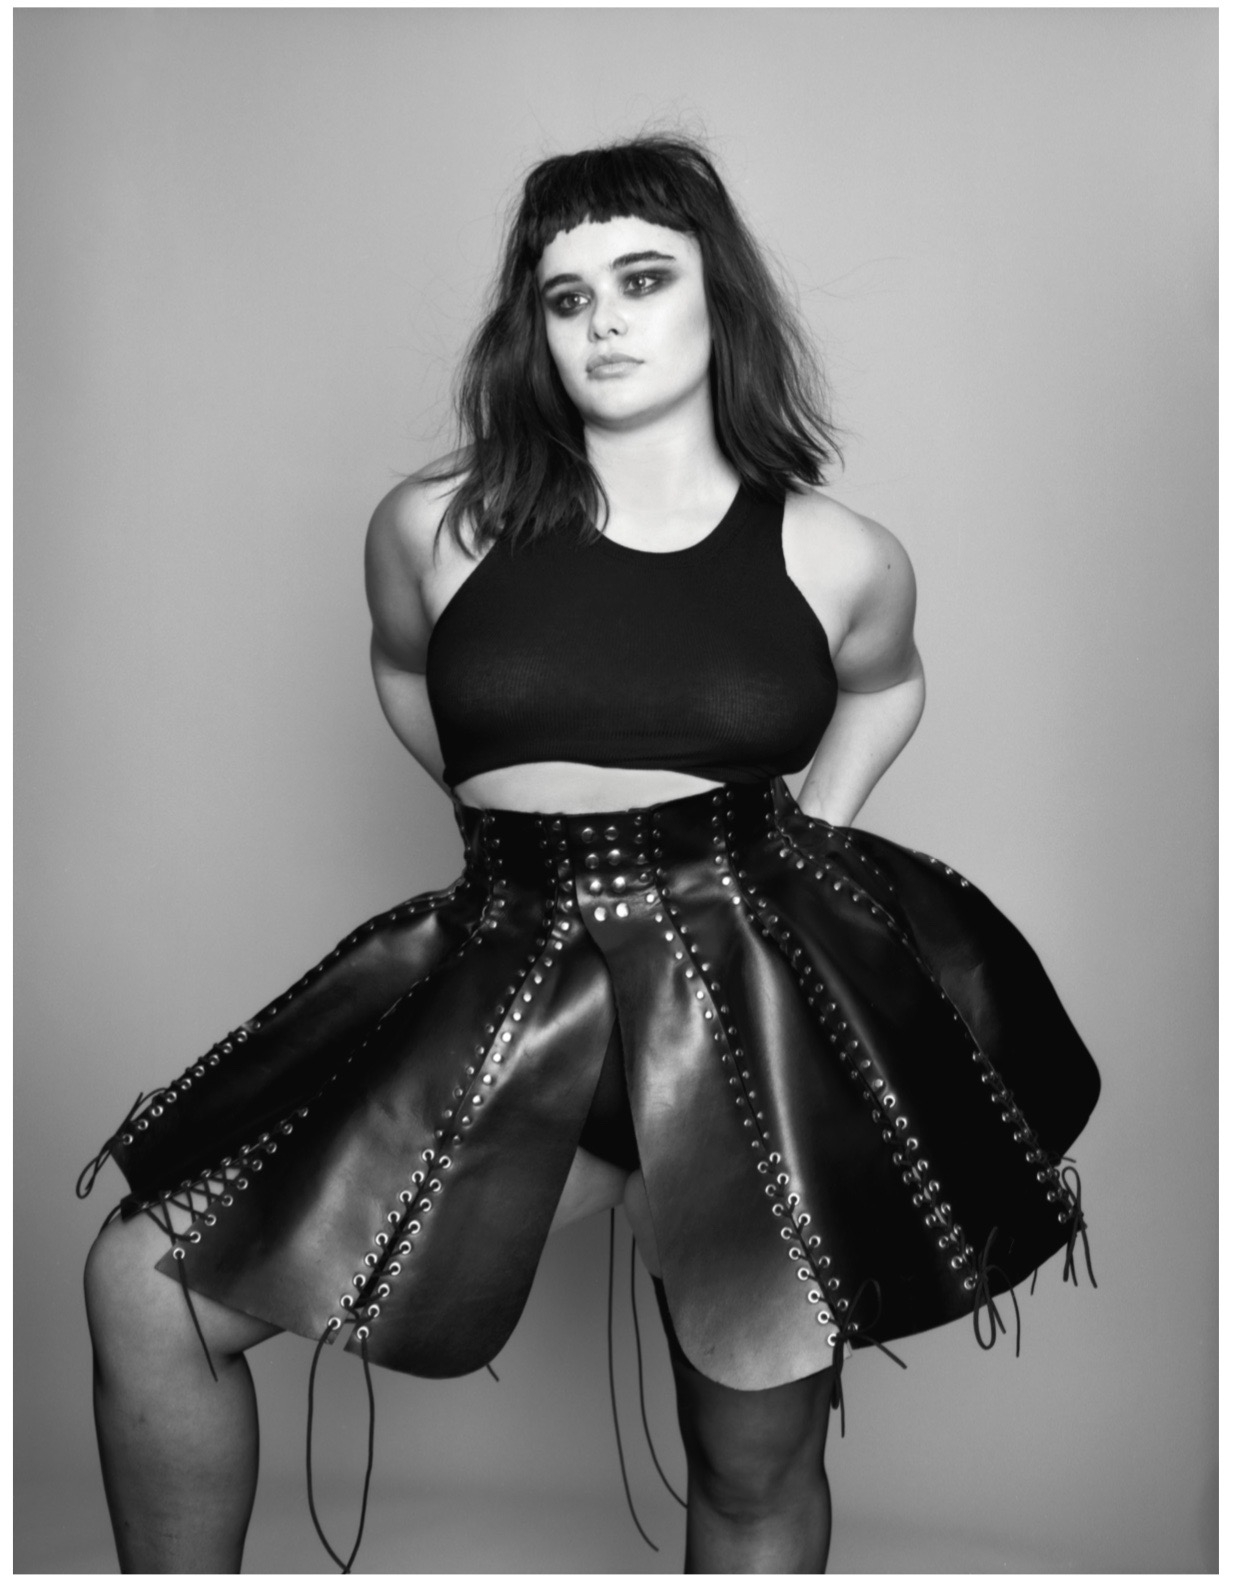 CoqCreative power by ProductionLink s.r.l. Barbie-Ferreira-For-Dazed Barbie-Ferreira-For-Dazed  Barbie-Ferreira-For-Dazed